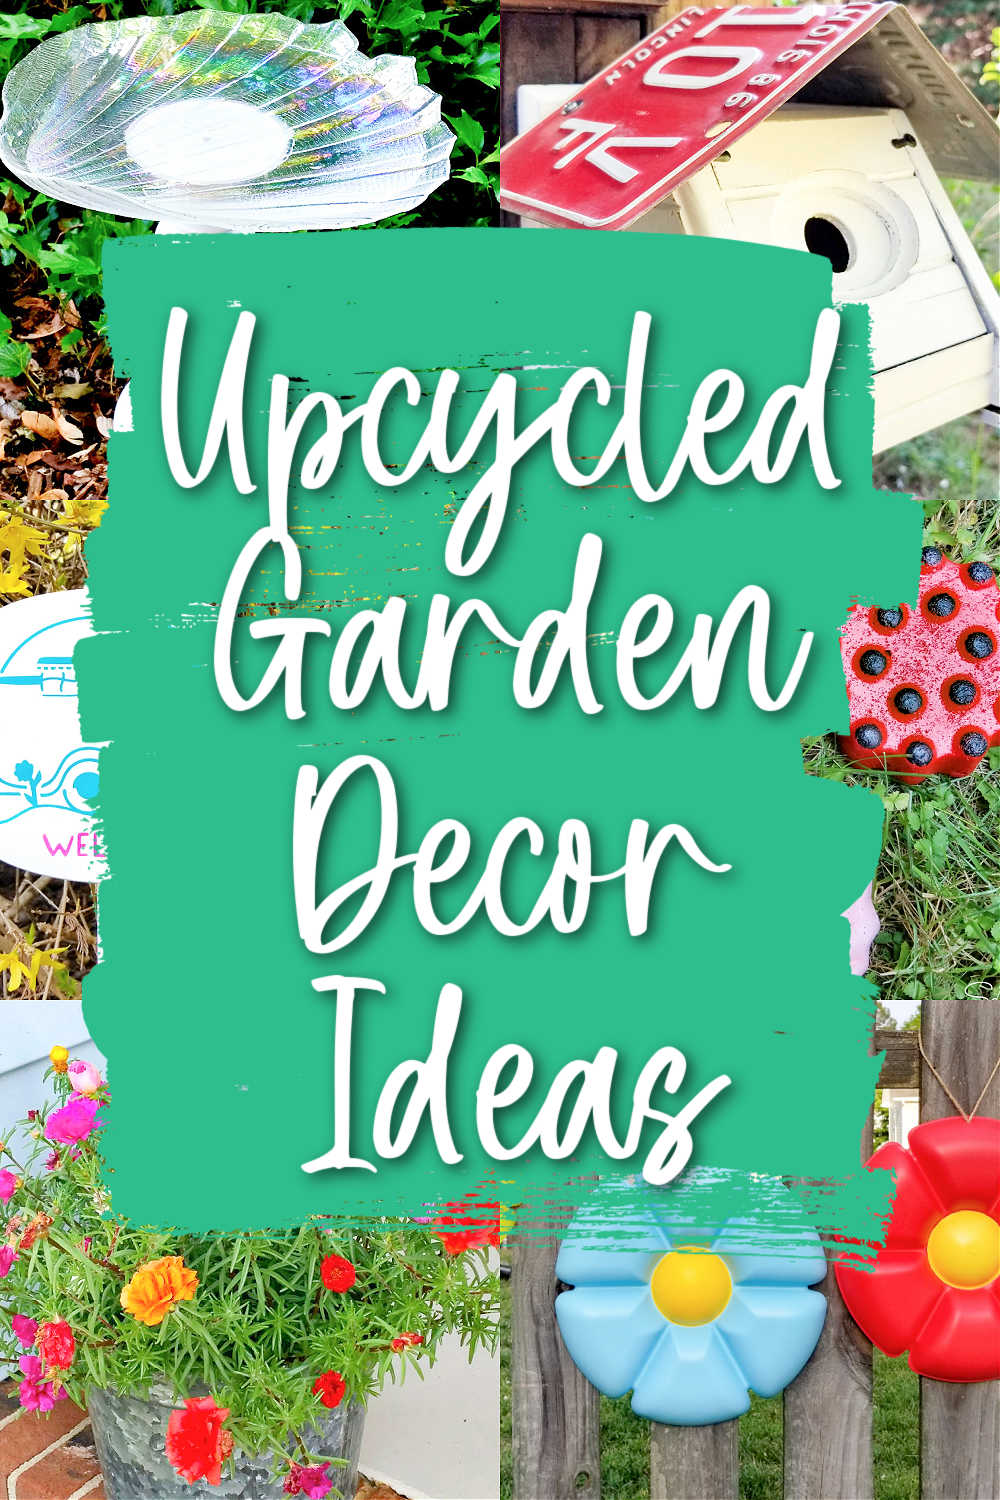 upcycling projects and garden decor ideas